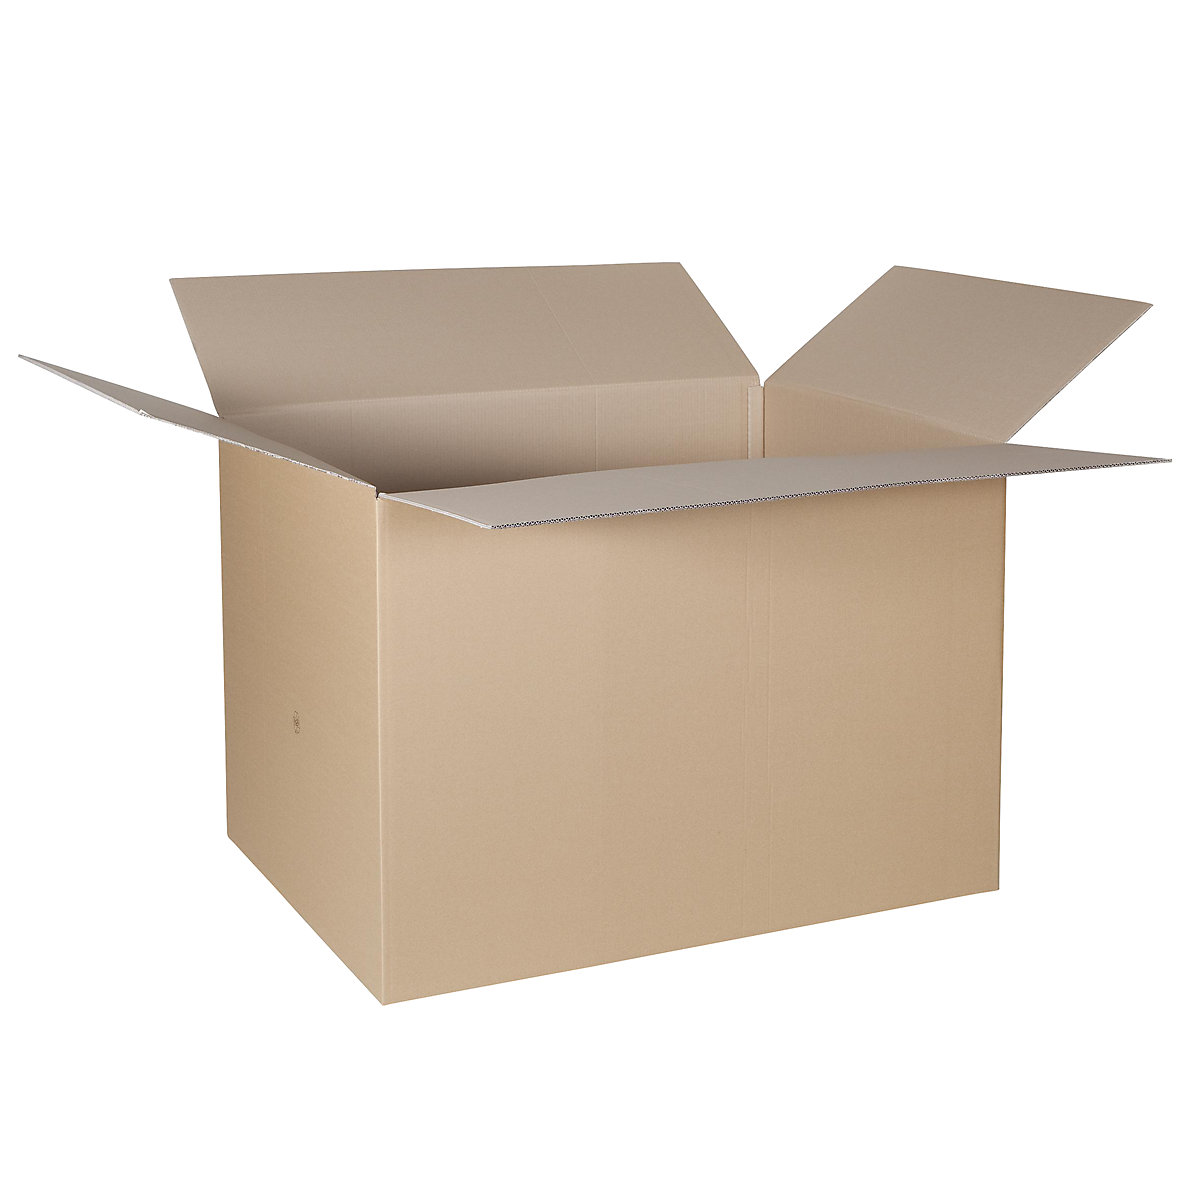 Folding cardboard box, FEFCO 0201, made of double fluted cardboard, internal dimensions 1180 x 780 x 800 mm, pack of 25-18